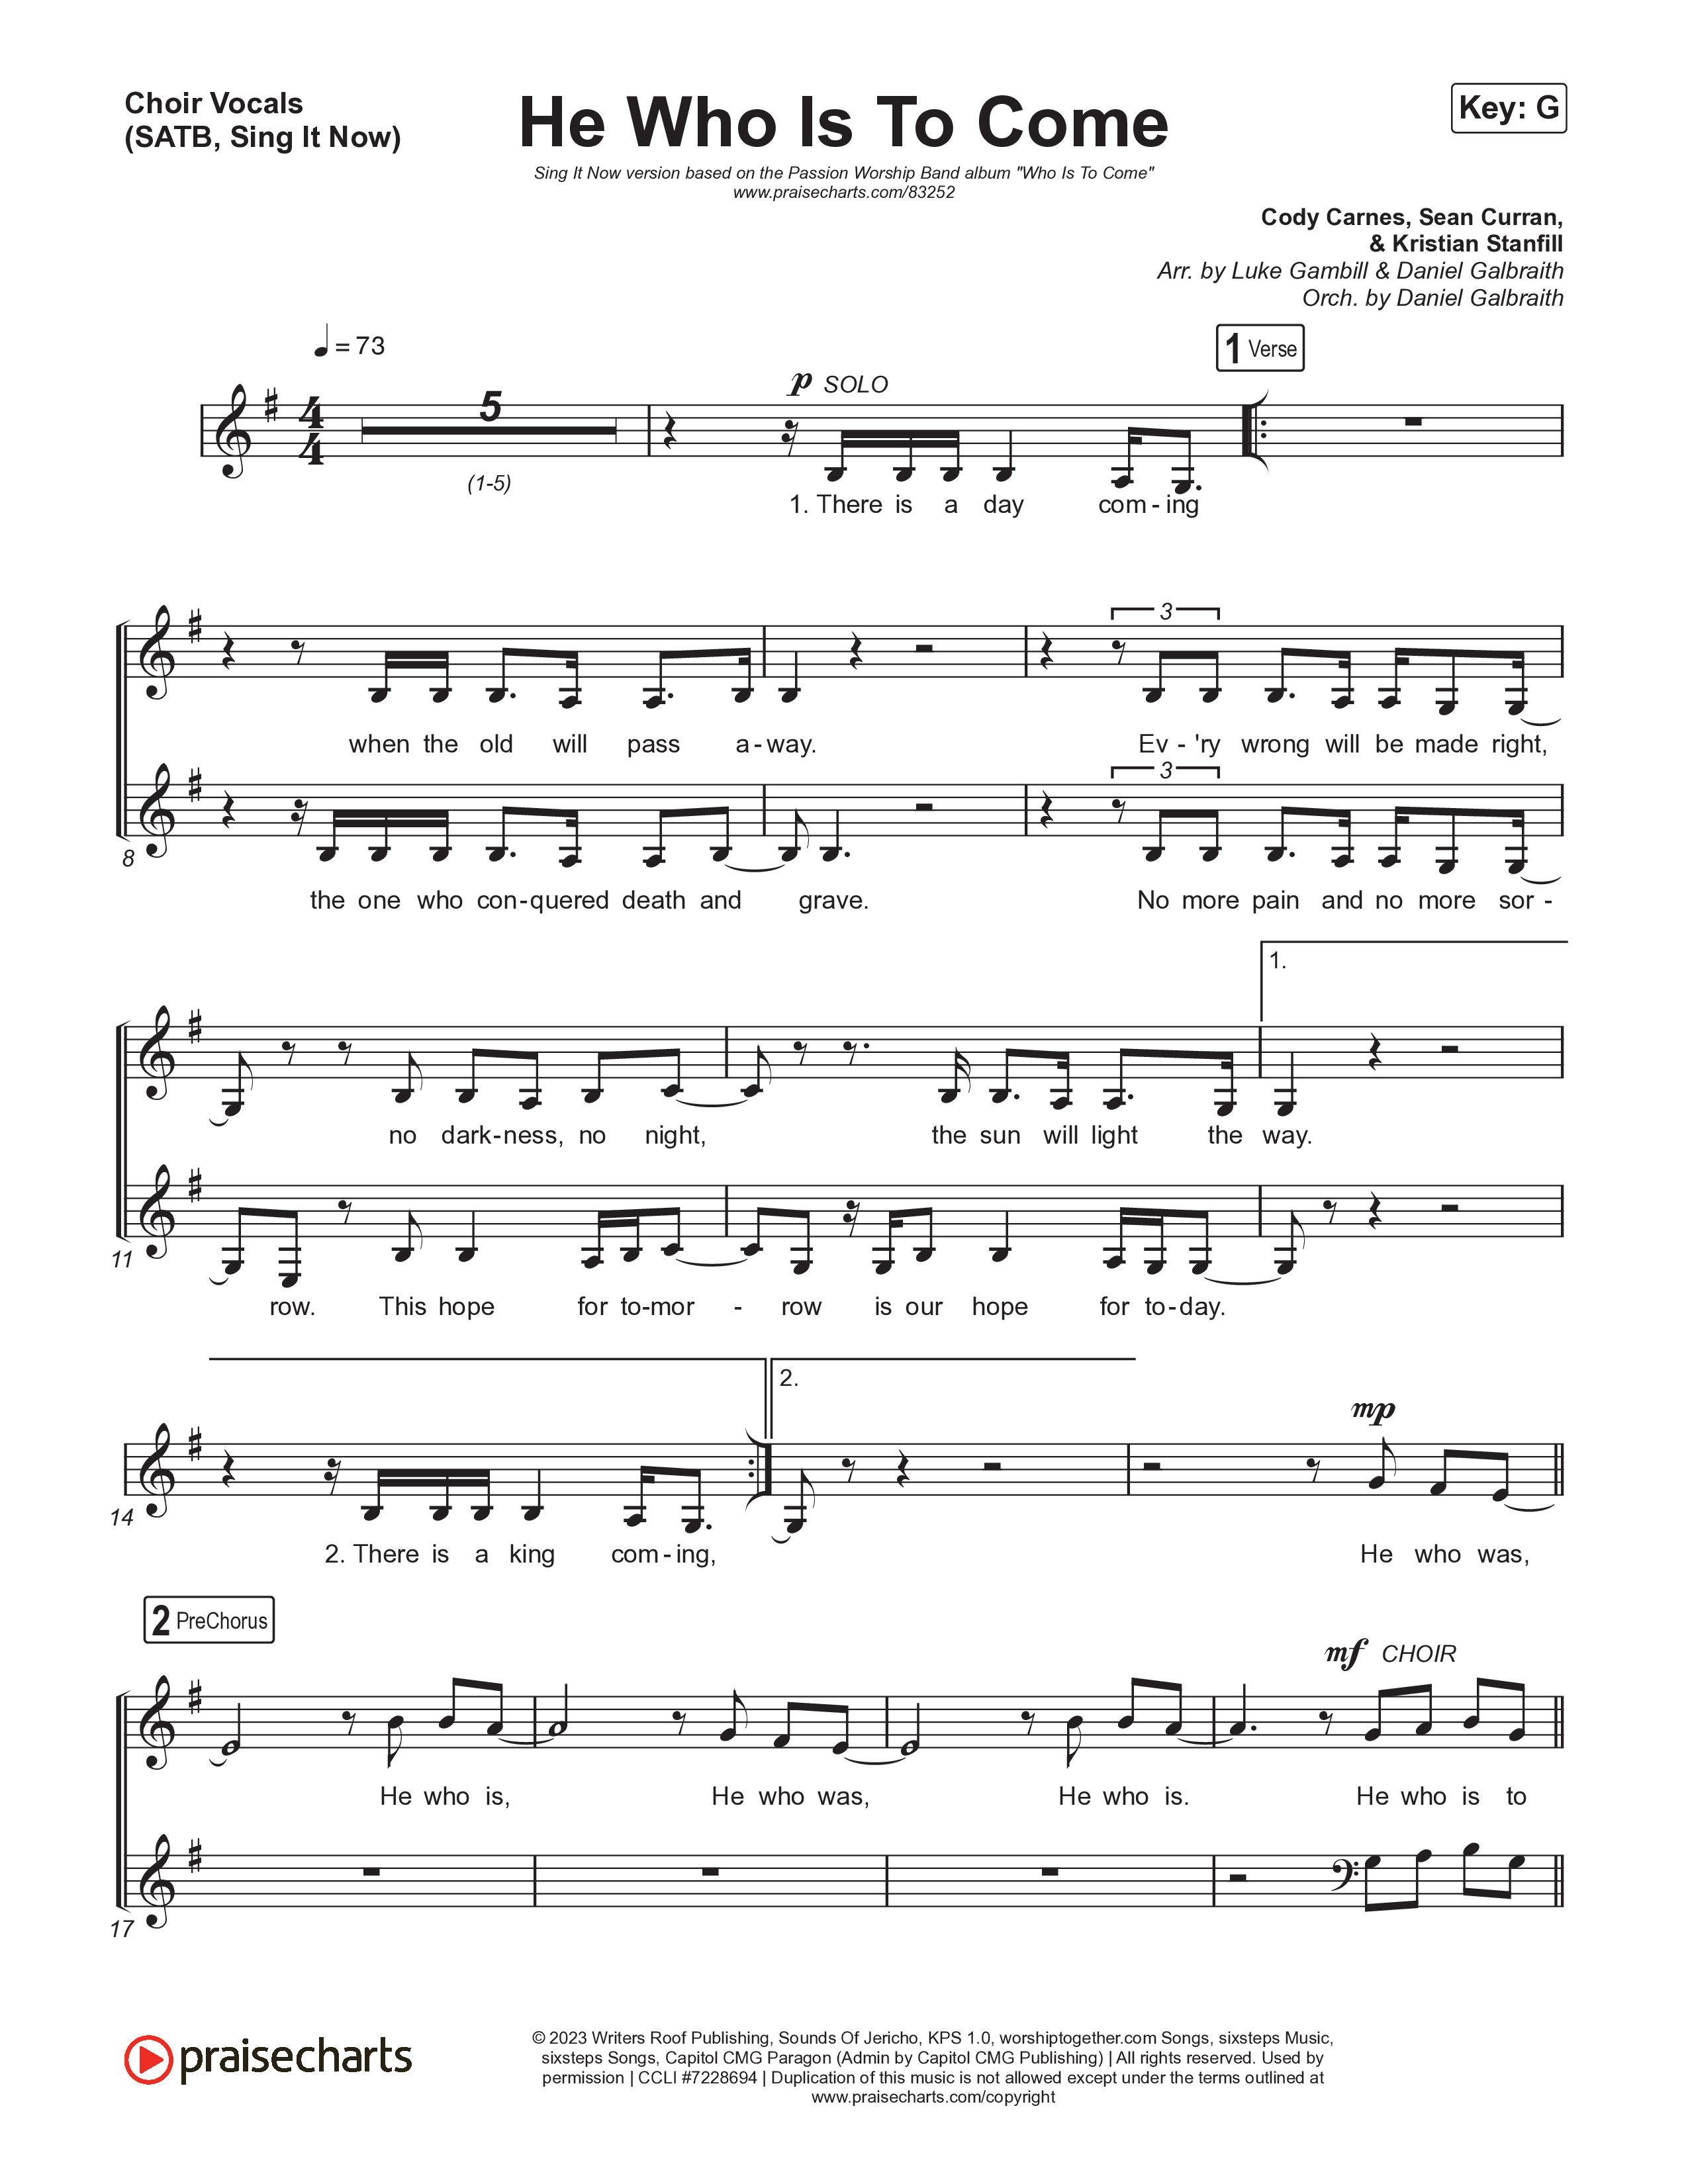 He Who Is To Come (Sing It Now) Choir Sheet (SATB) (Passion / Cody Carnes / Kristian Stanfill / Arr. Luke Gambill)